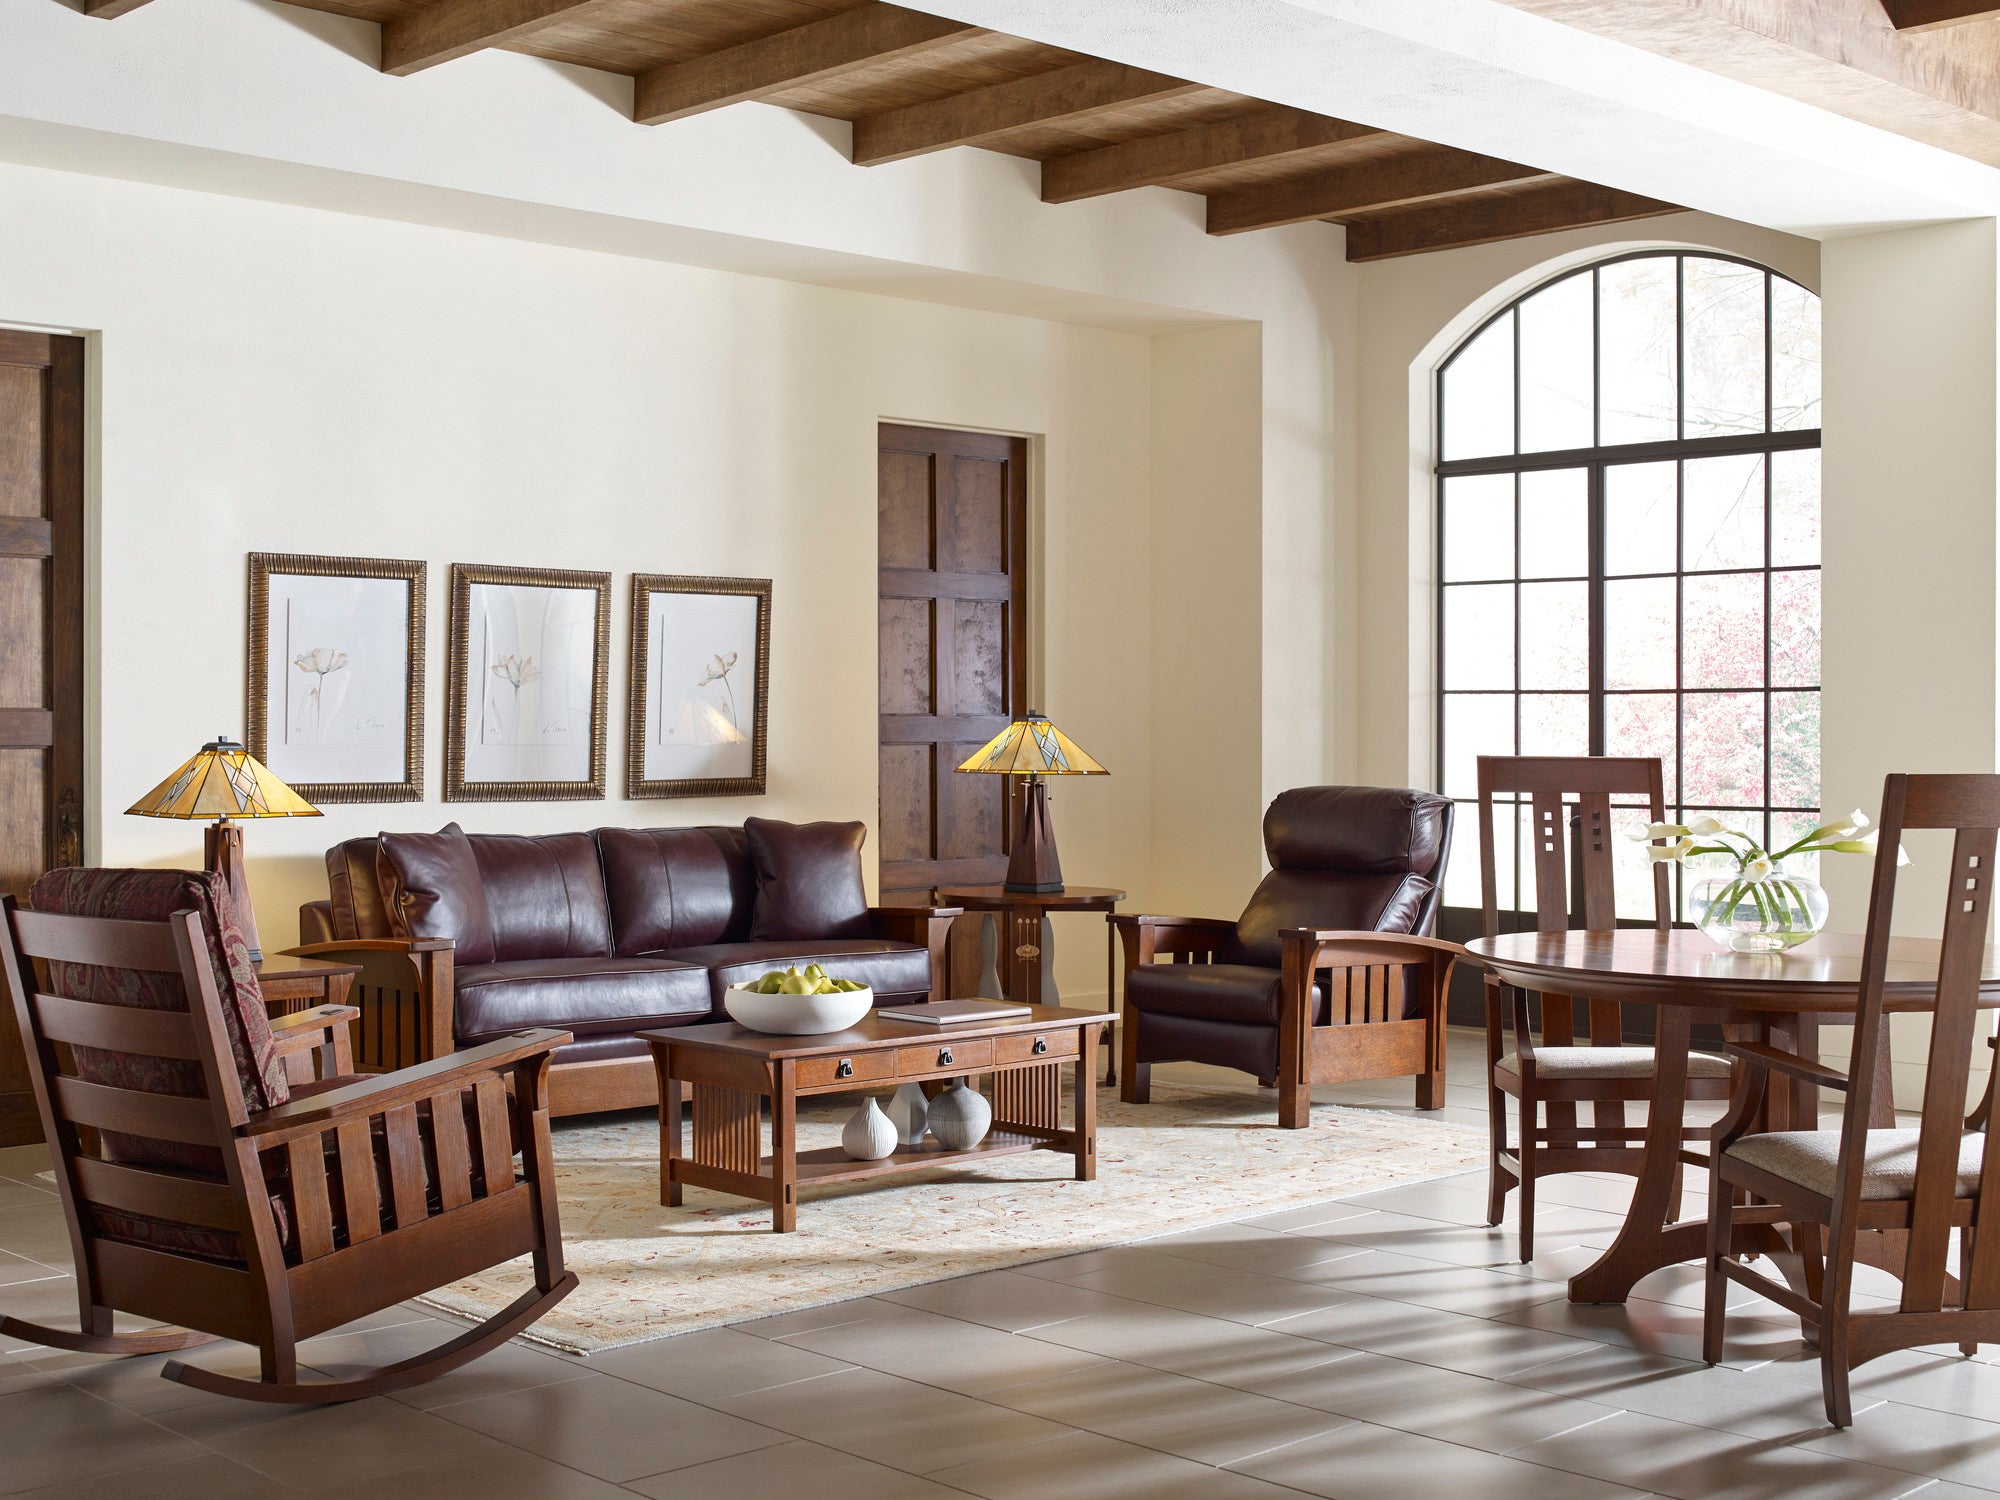 Large living room scene with small dining area from Stickley's Mission collection.